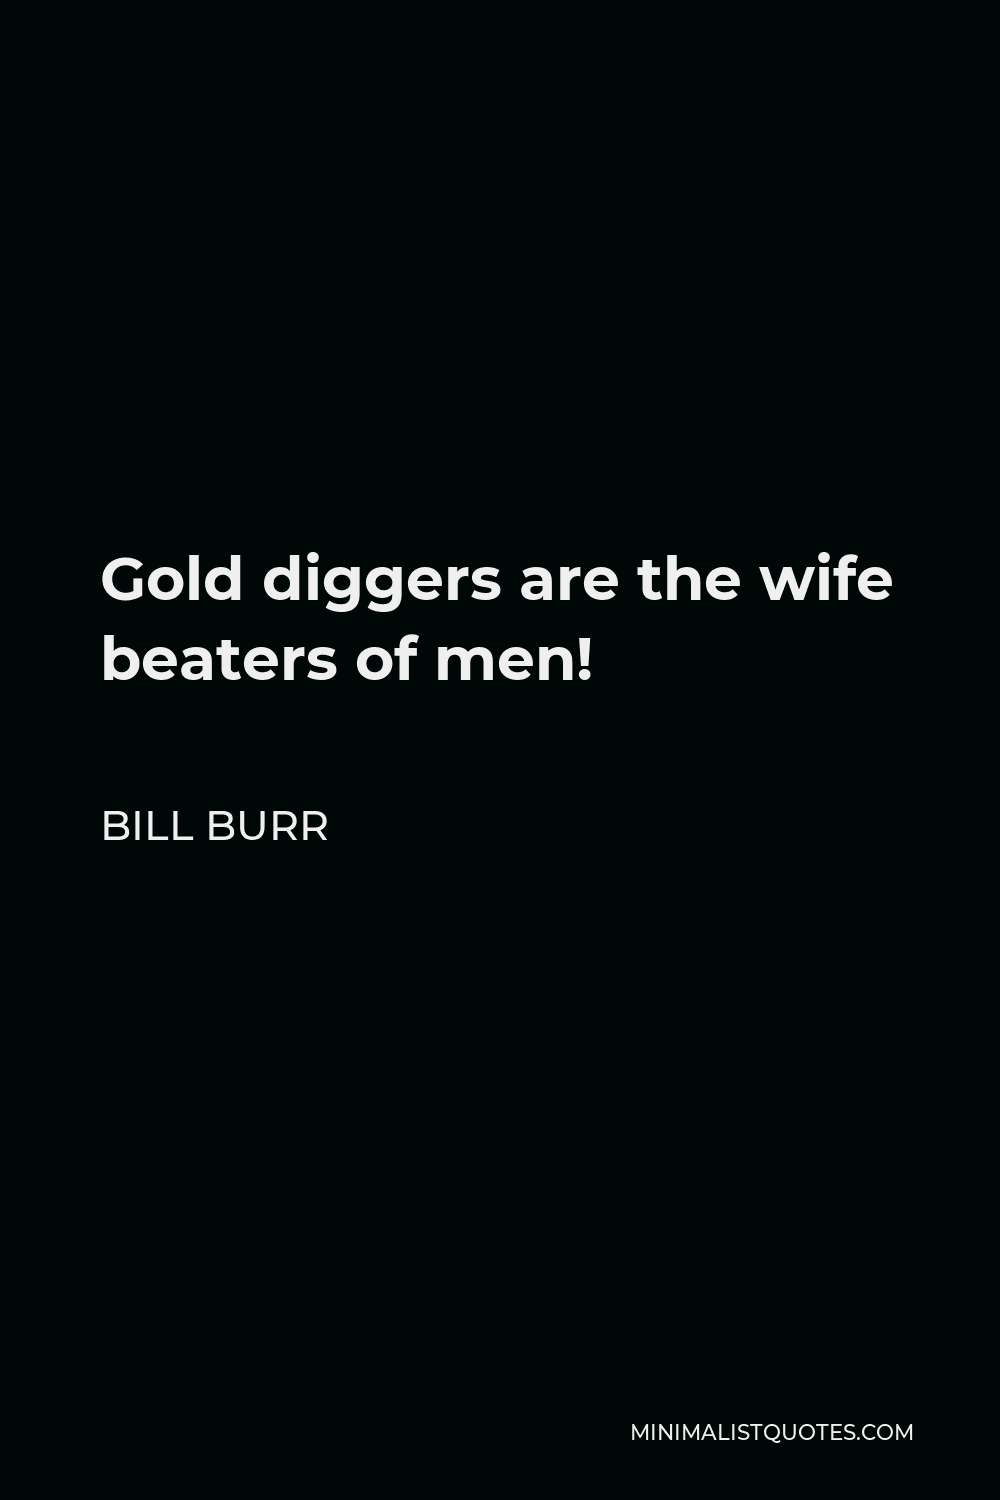 Bill Burr Quote - Gold diggers are the wife beaters of men!